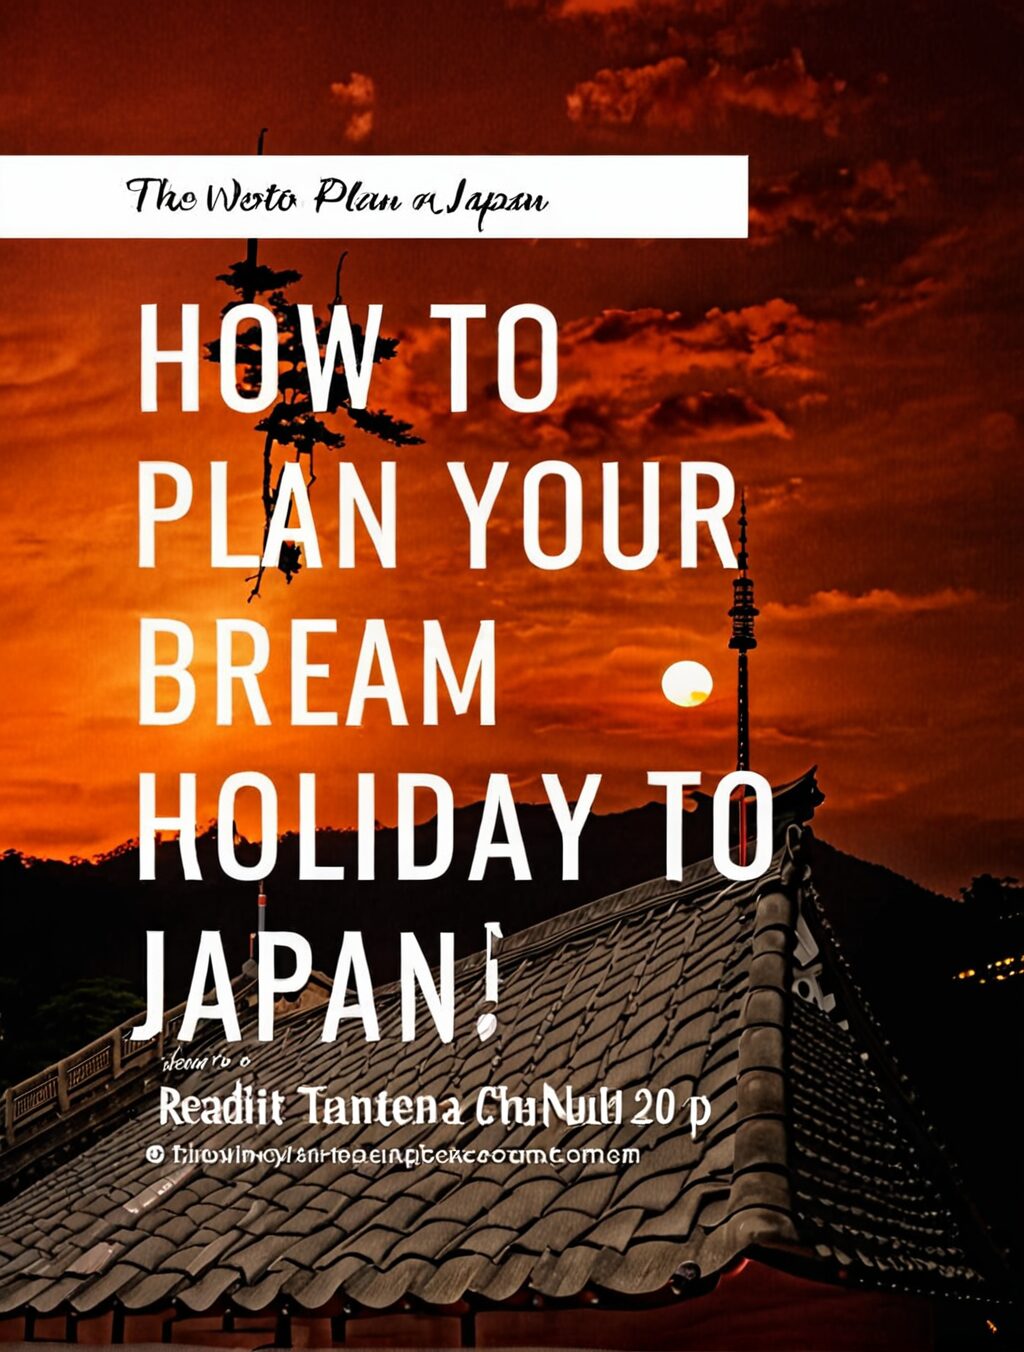 how to plan a trip to japan reddit